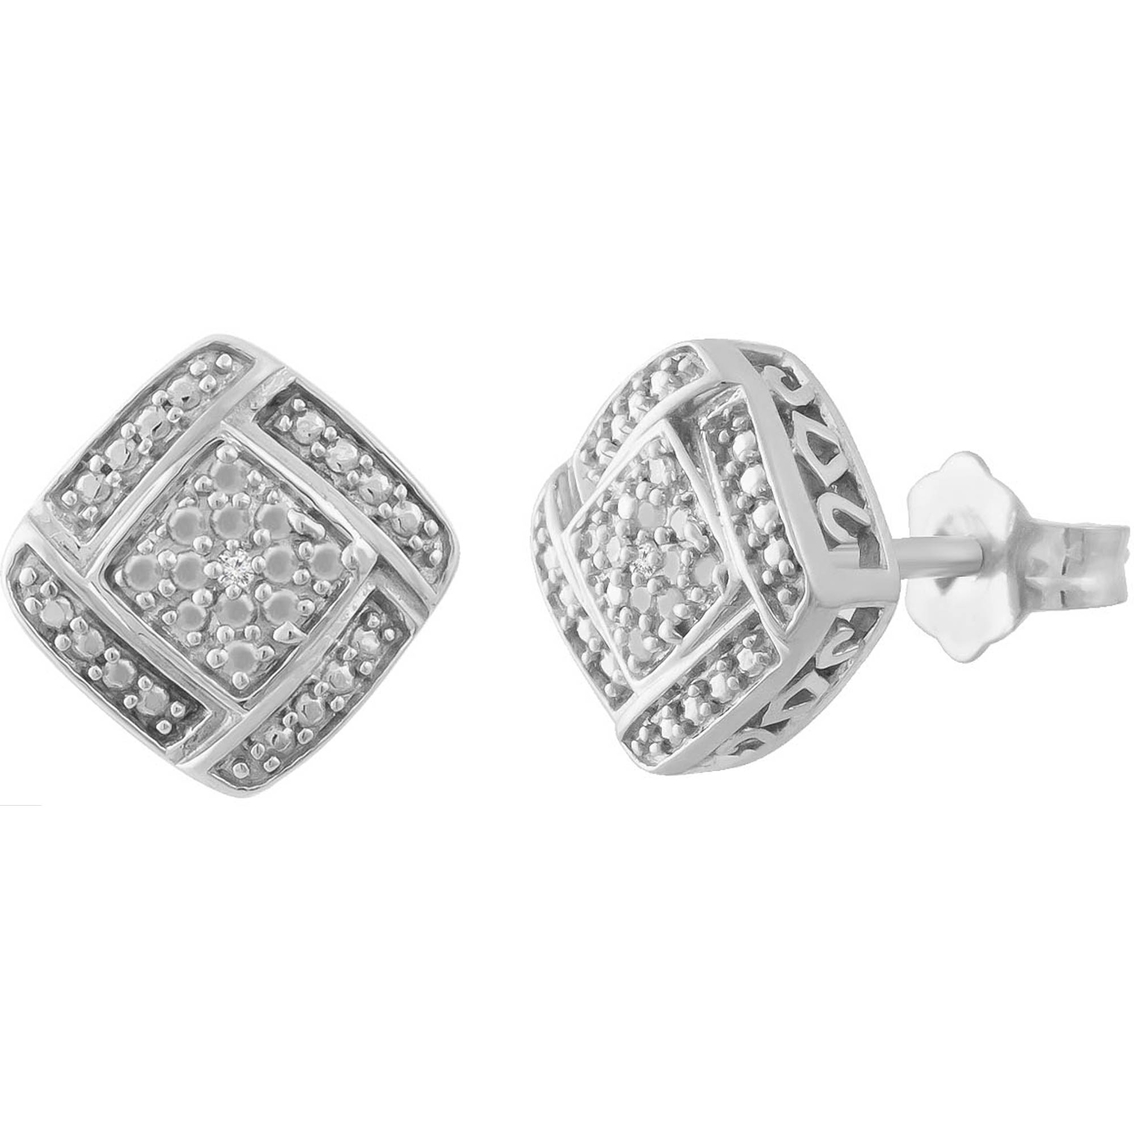 Sterling Silver Diamond Accent Pendant, Earrings and Ring Box Set - Image 3 of 4